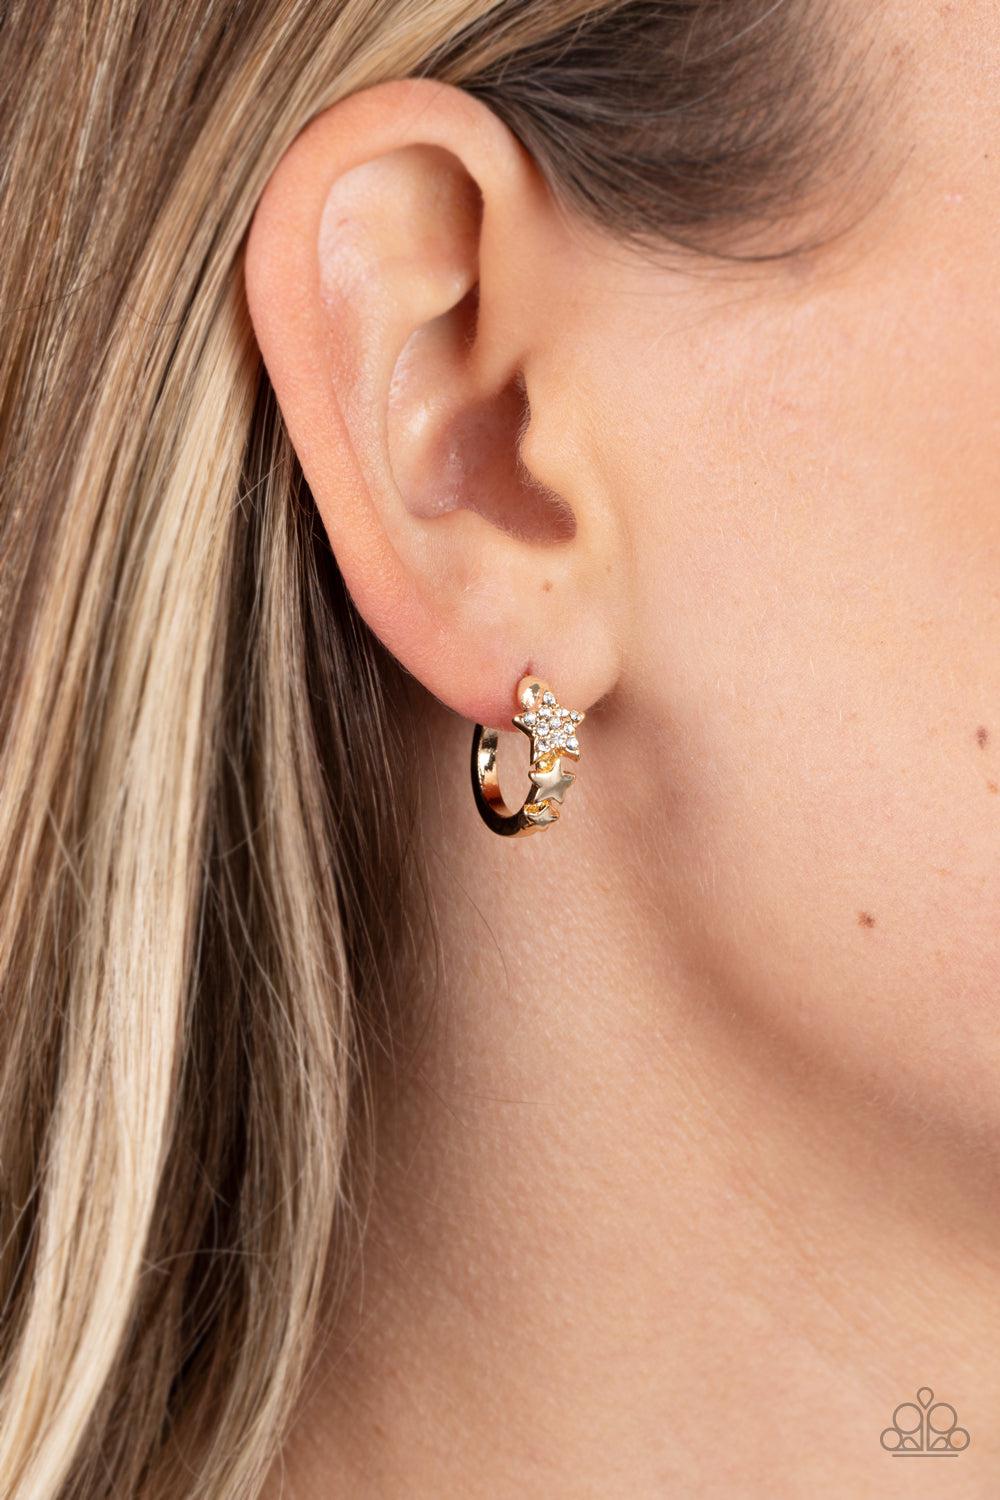 Starfish Showpiece Gold Hoop Earrings - Paparazzi Accessories-on model - CarasShop.com - $5 Jewelry by Cara Jewels